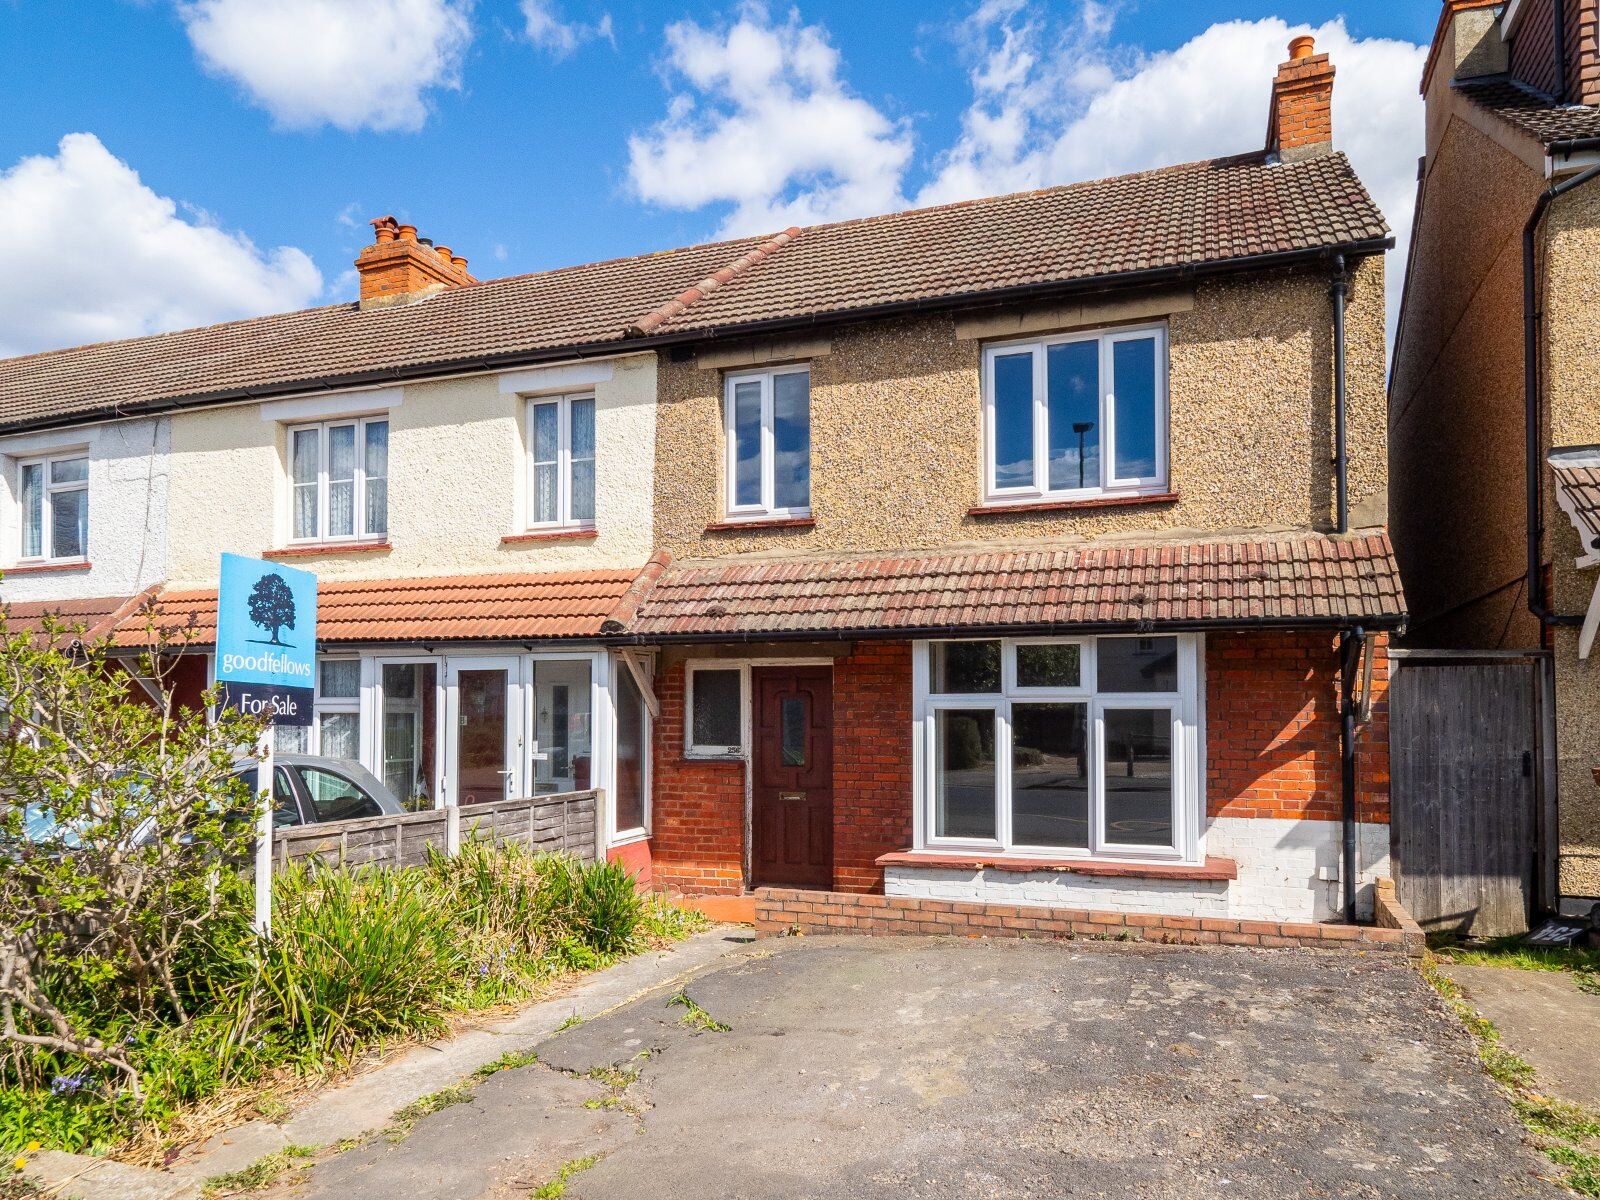 3 bedroom semi detached house for sale Malden Road, Cheam, SM3, main image